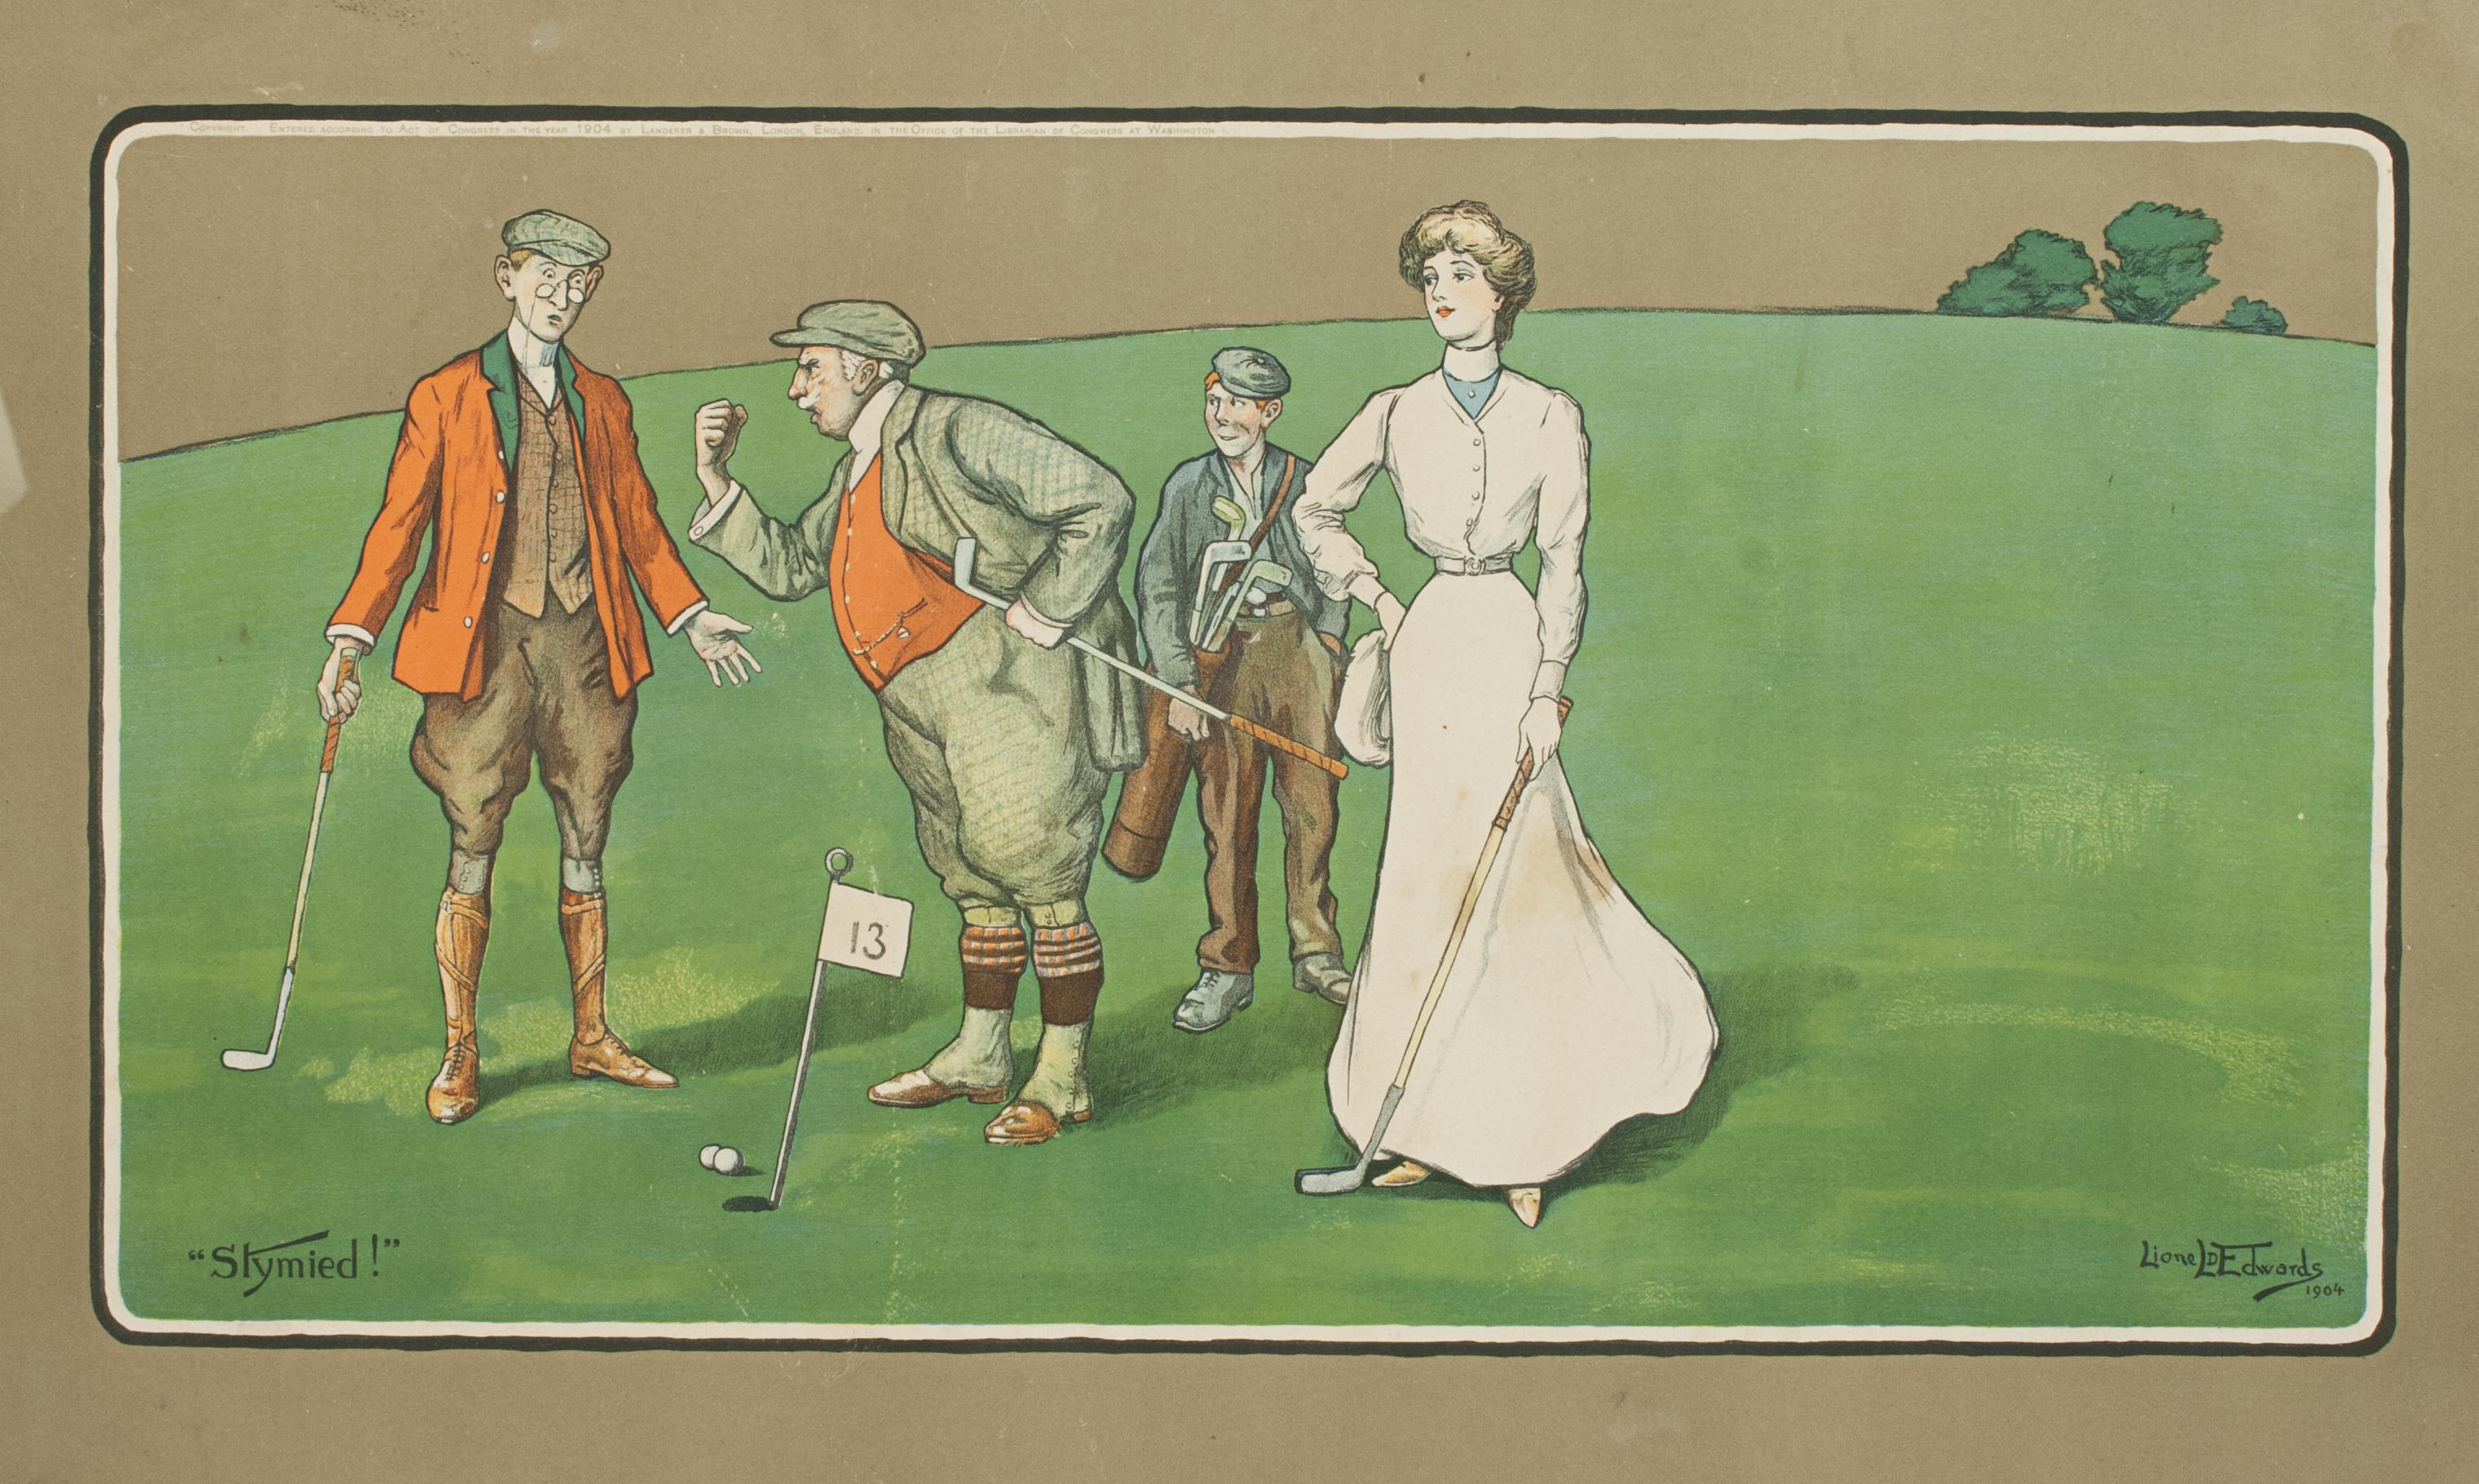 Sporting Art Golf Chromolithographs by Lionell Edwards, a Threesome & Stymied For Sale